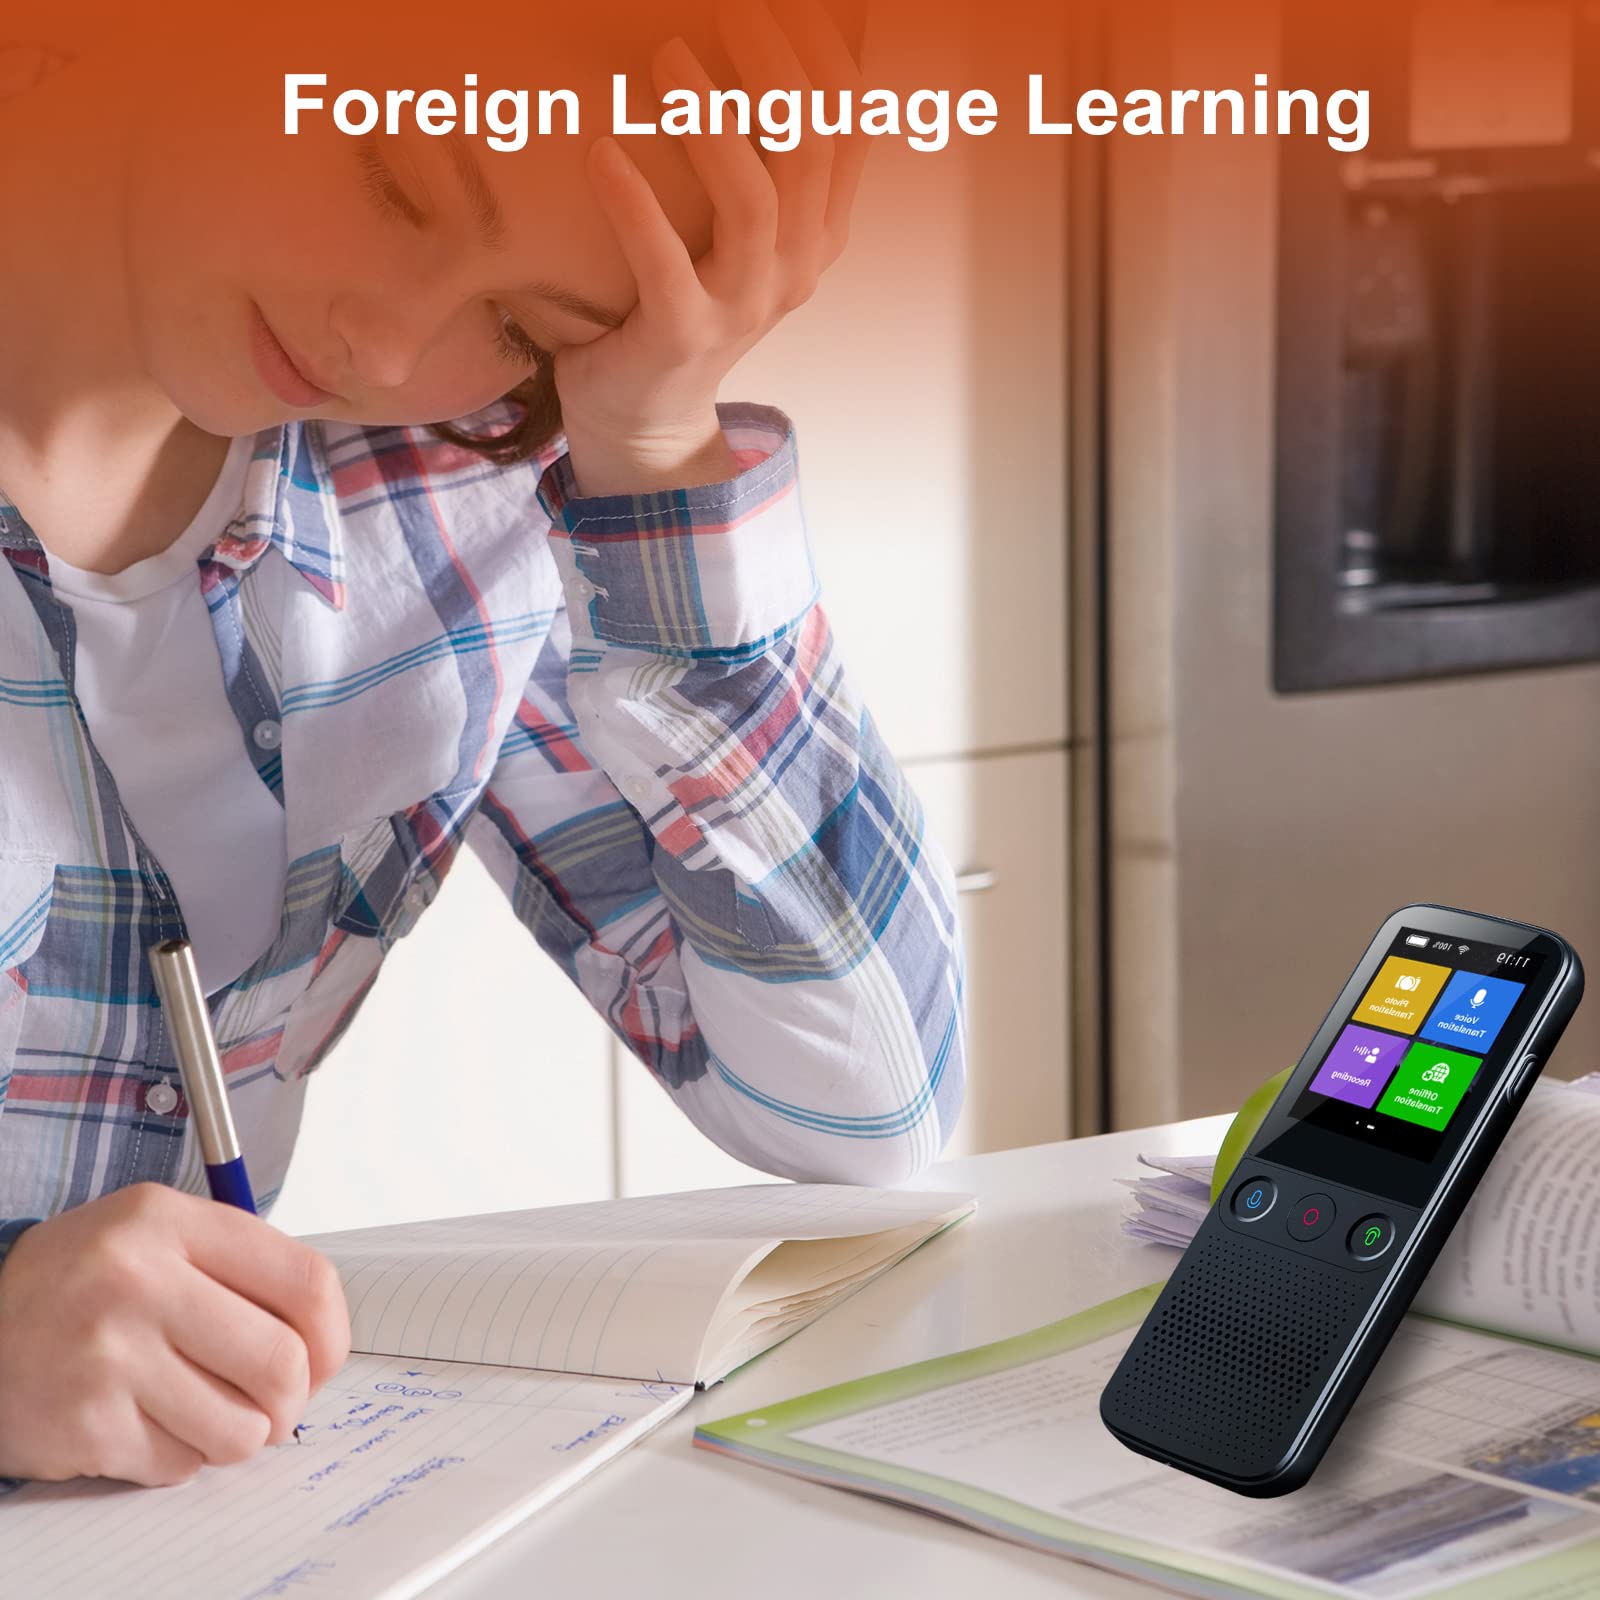 Language Instant Translator Device Portable Real-time Voice Translation in 137 Different Languages and Accents, Support Offline/WiFi/Hotspot Accuracy Image Interpreter Translation